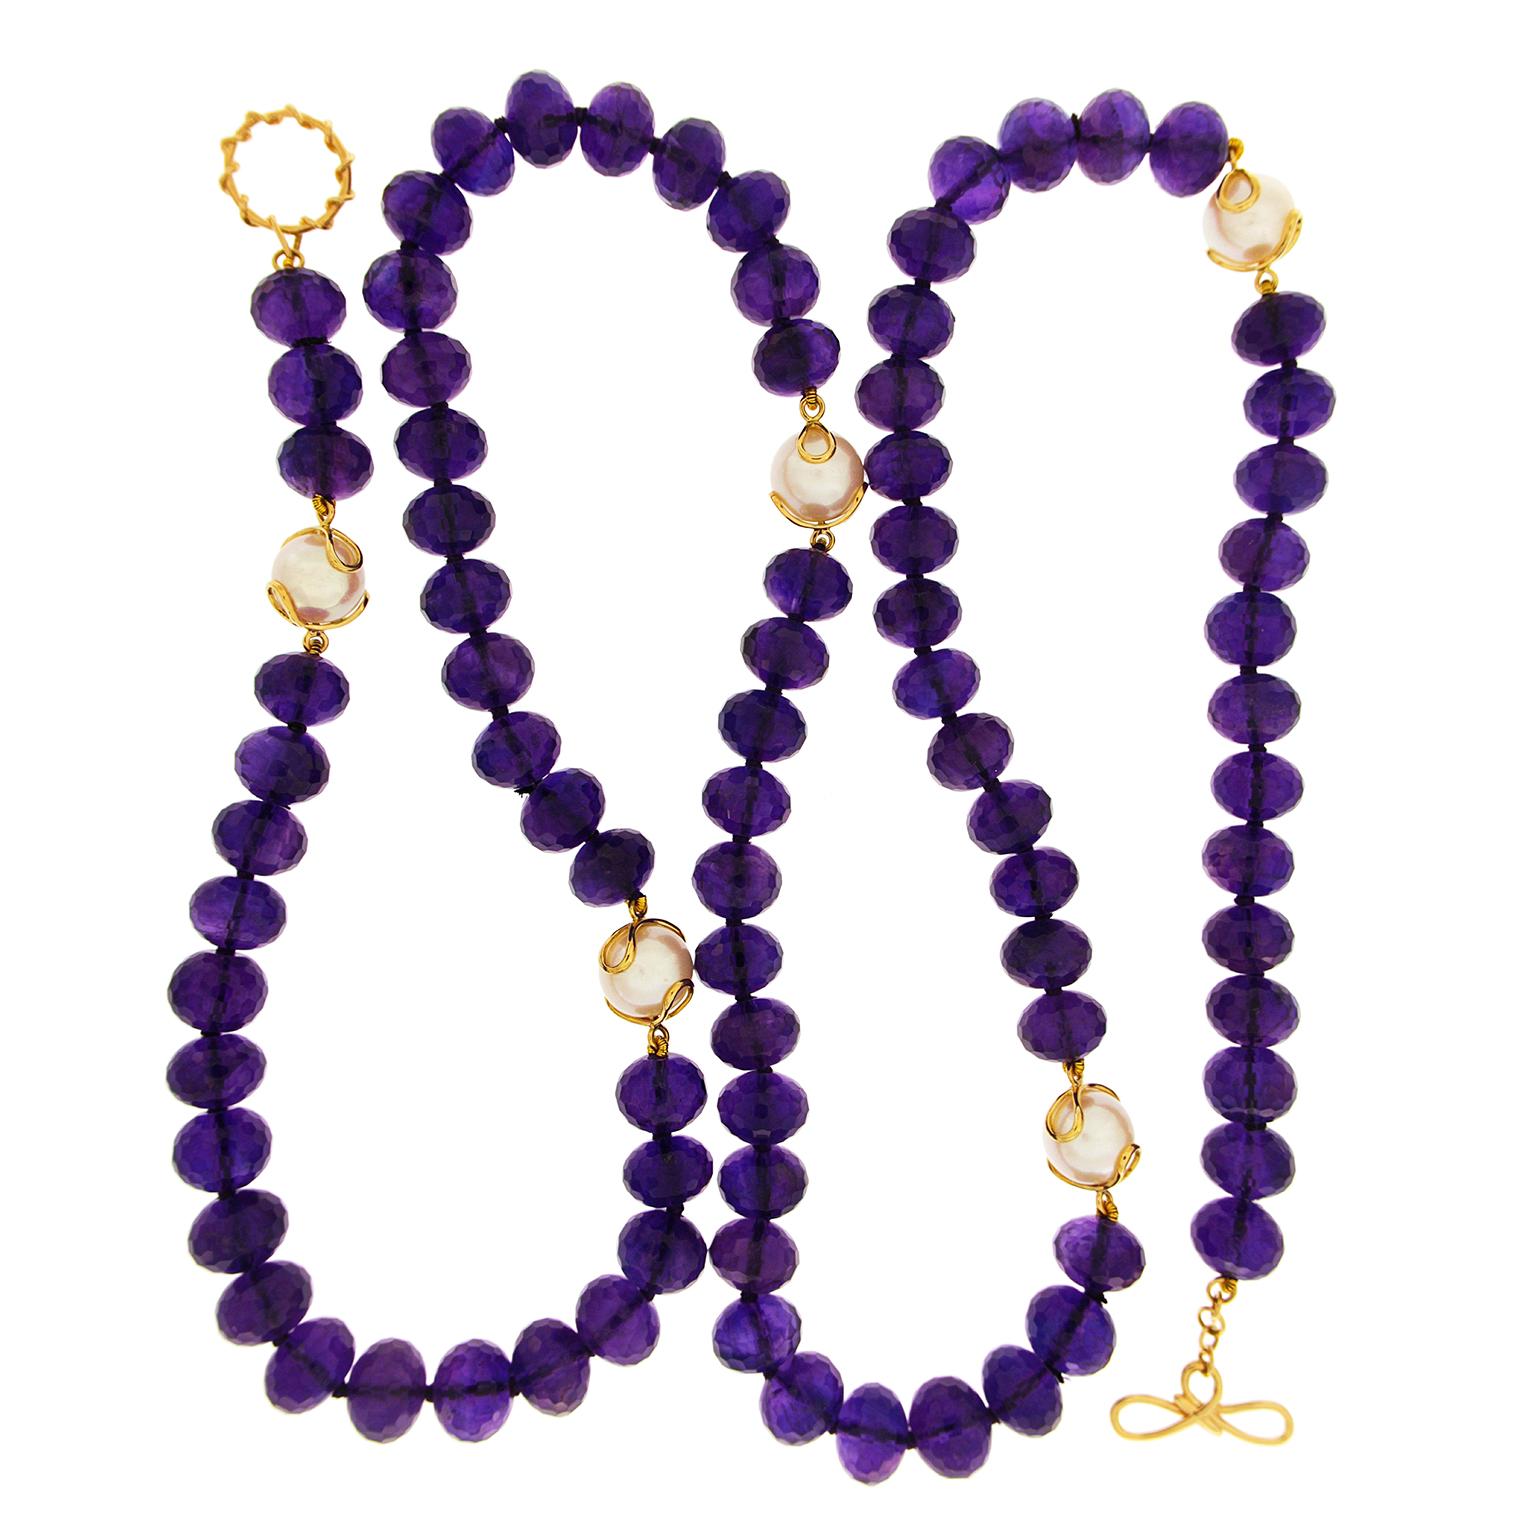 A regal fusion of amethyst and white pearl enlivens this necklace. Rondelles of amethyst release intense violet hues through their facetted semitransparent bodies. Five freshwater pearls are specially placed throughout the necklace for a satin